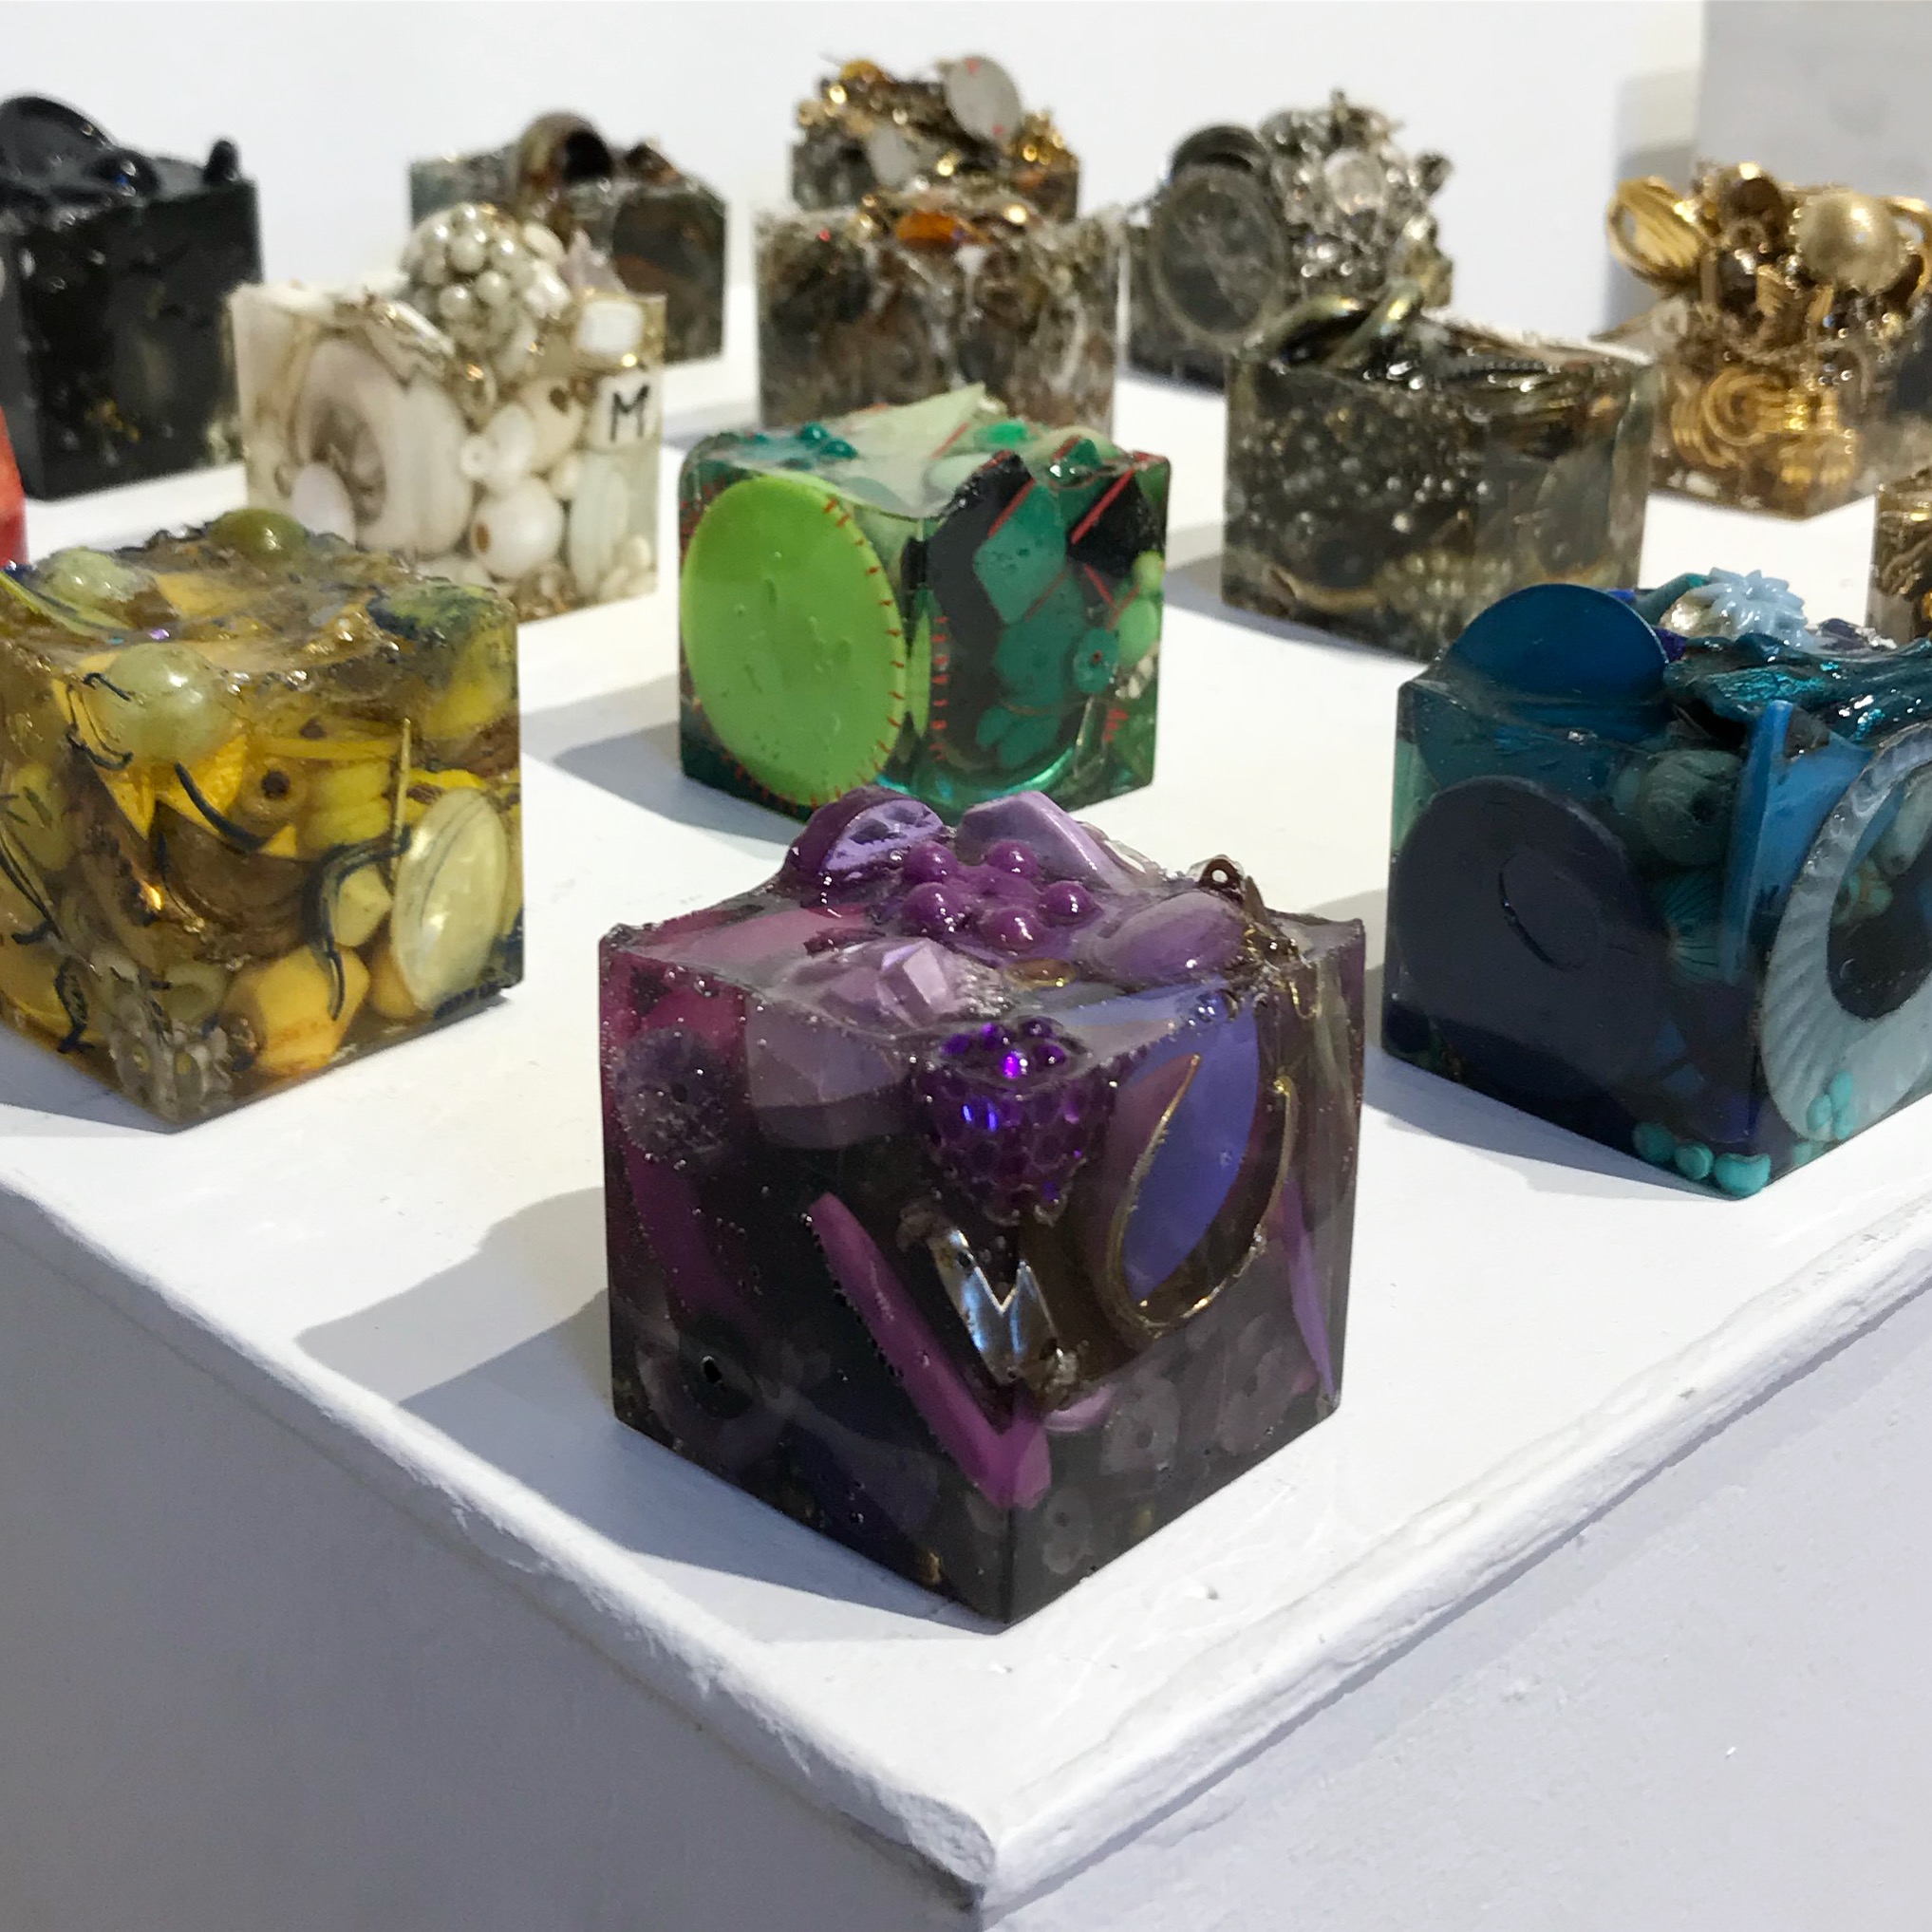  Sugar Cubes, 2019, costume jewelry, faux pearls, rhinestones, beads, keys, and found objects cast in resin, 2x2” 